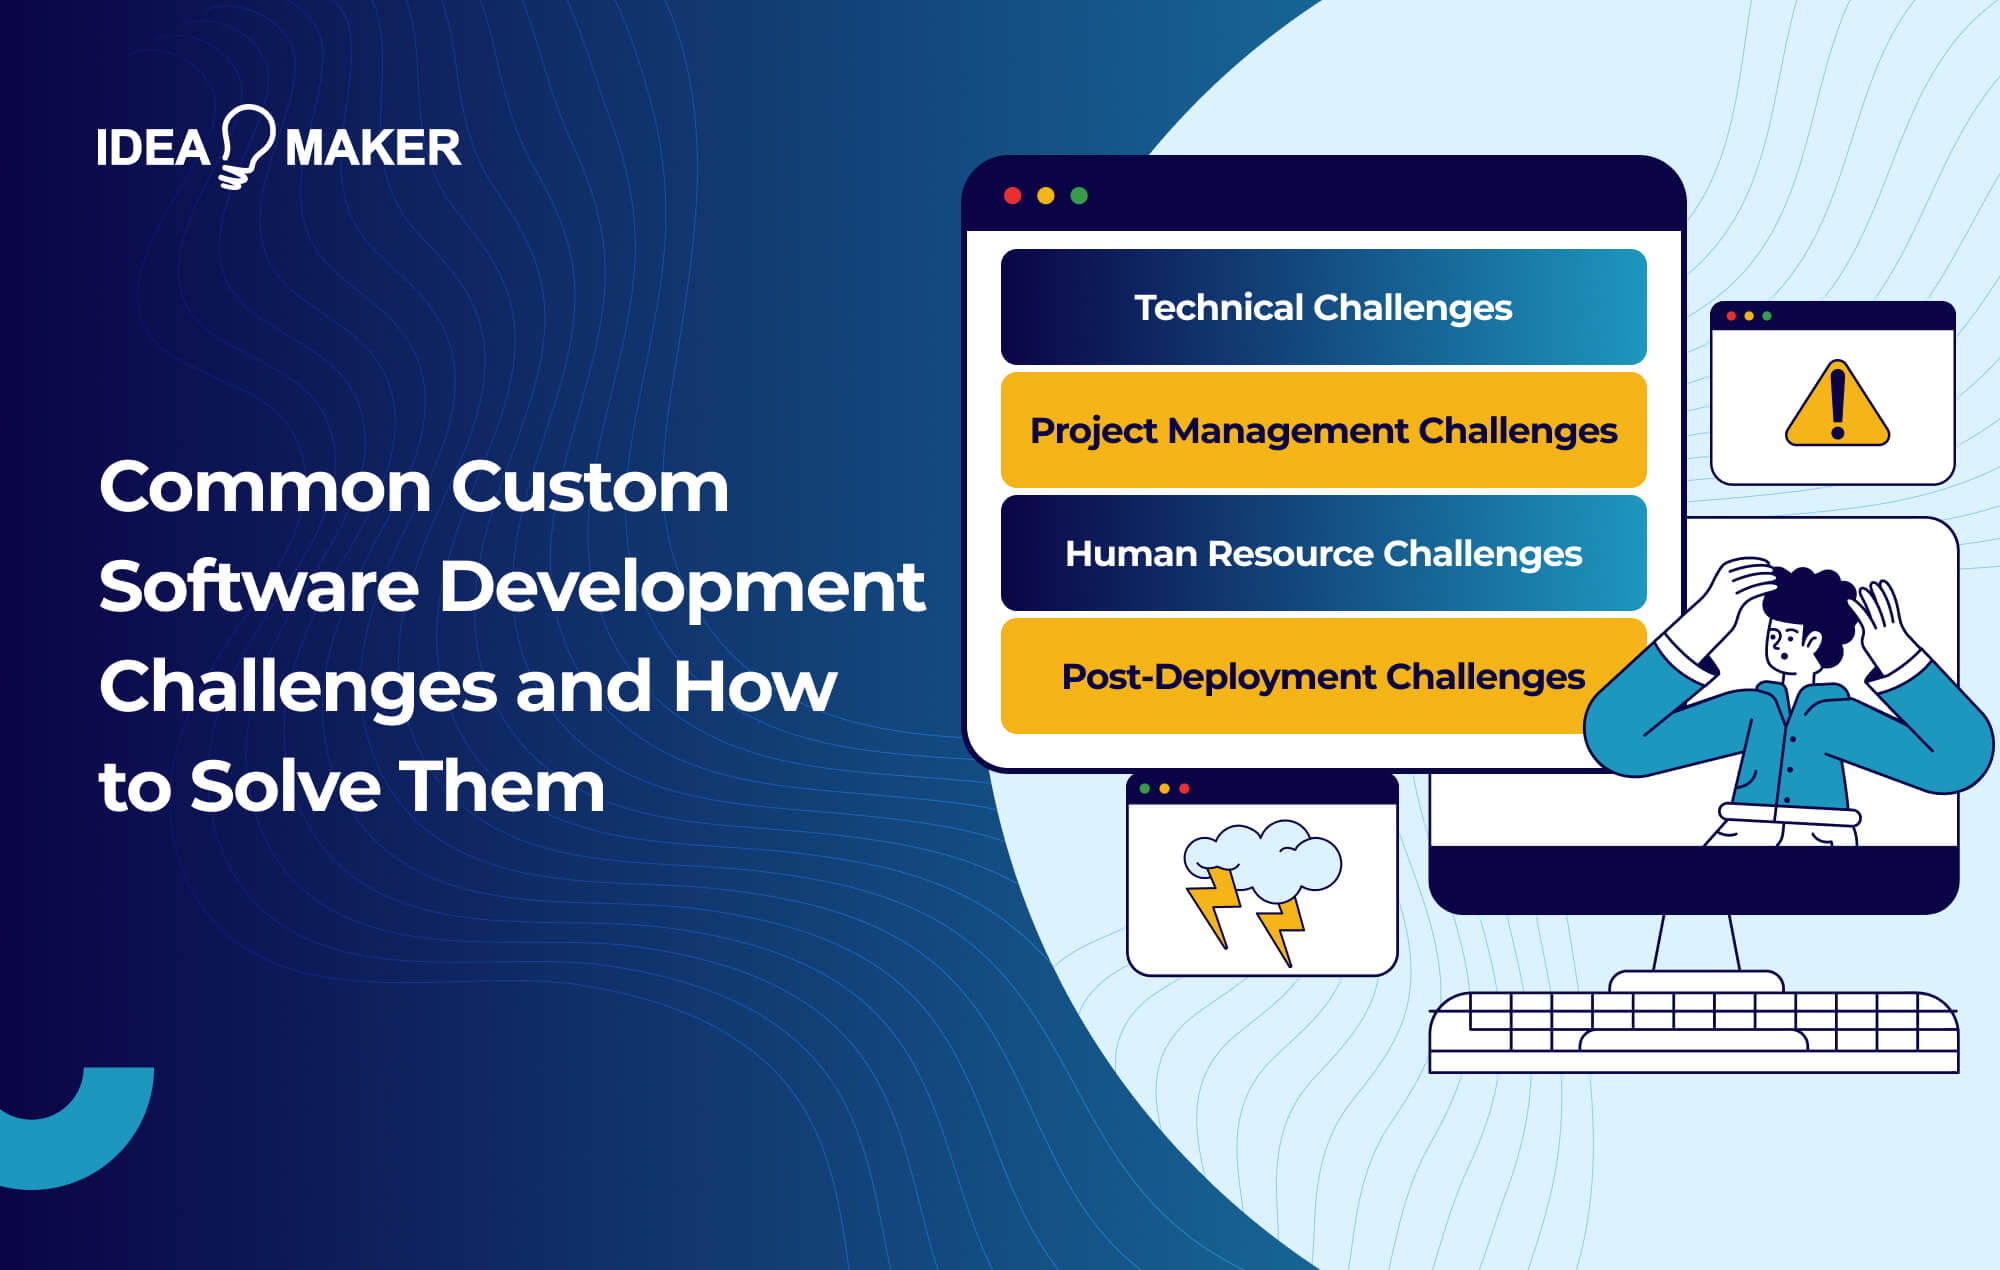 Ideamaker - Common Custom Software Development Challenges and How to Solve Them -Rework